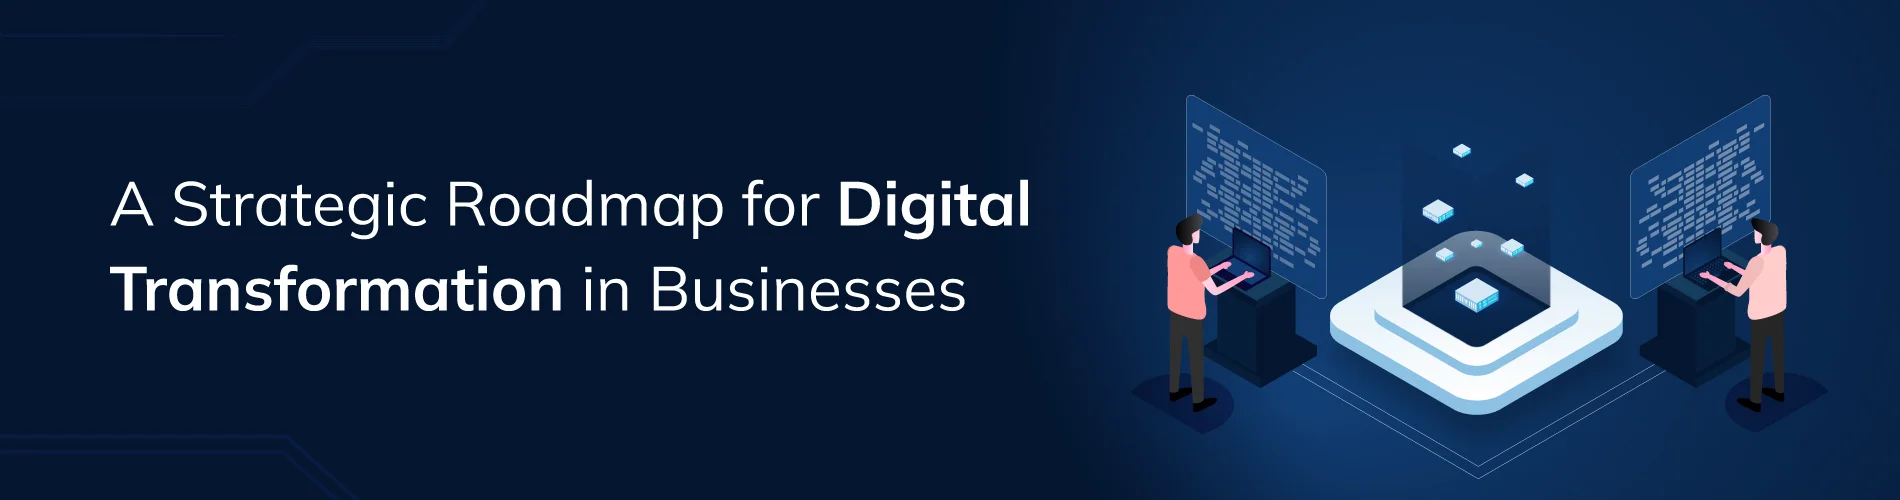 Roadmap for Digital Transformation in Businesses